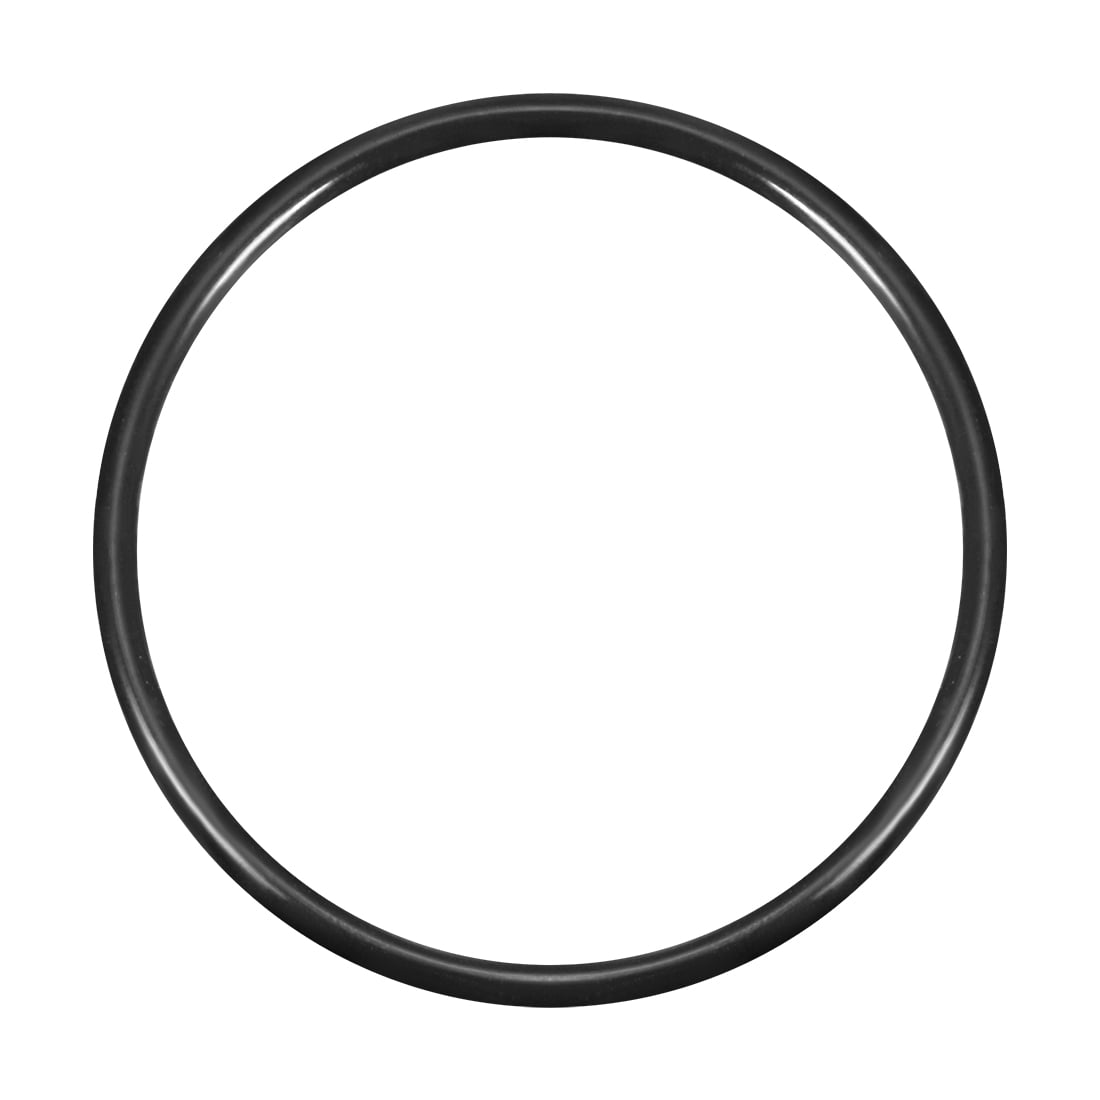 Metric 38mm O-Rings Nitrile Rubber Pack of 10 